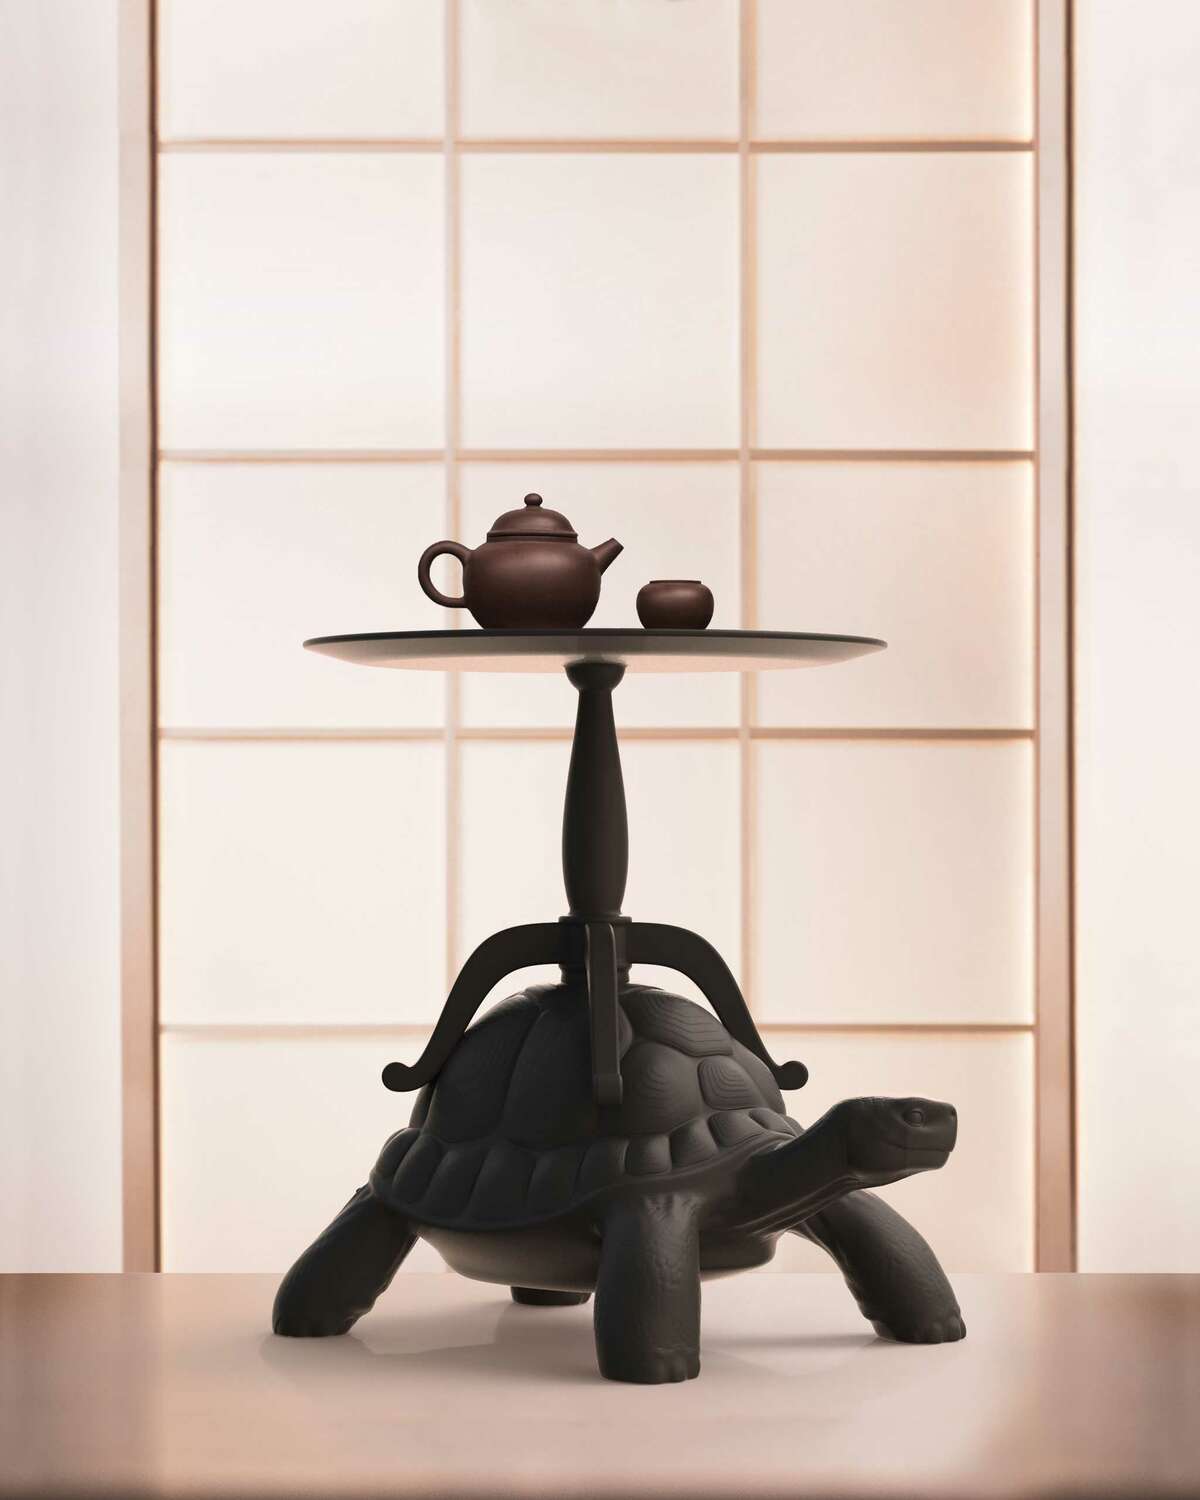 TURTLE CARRY table black